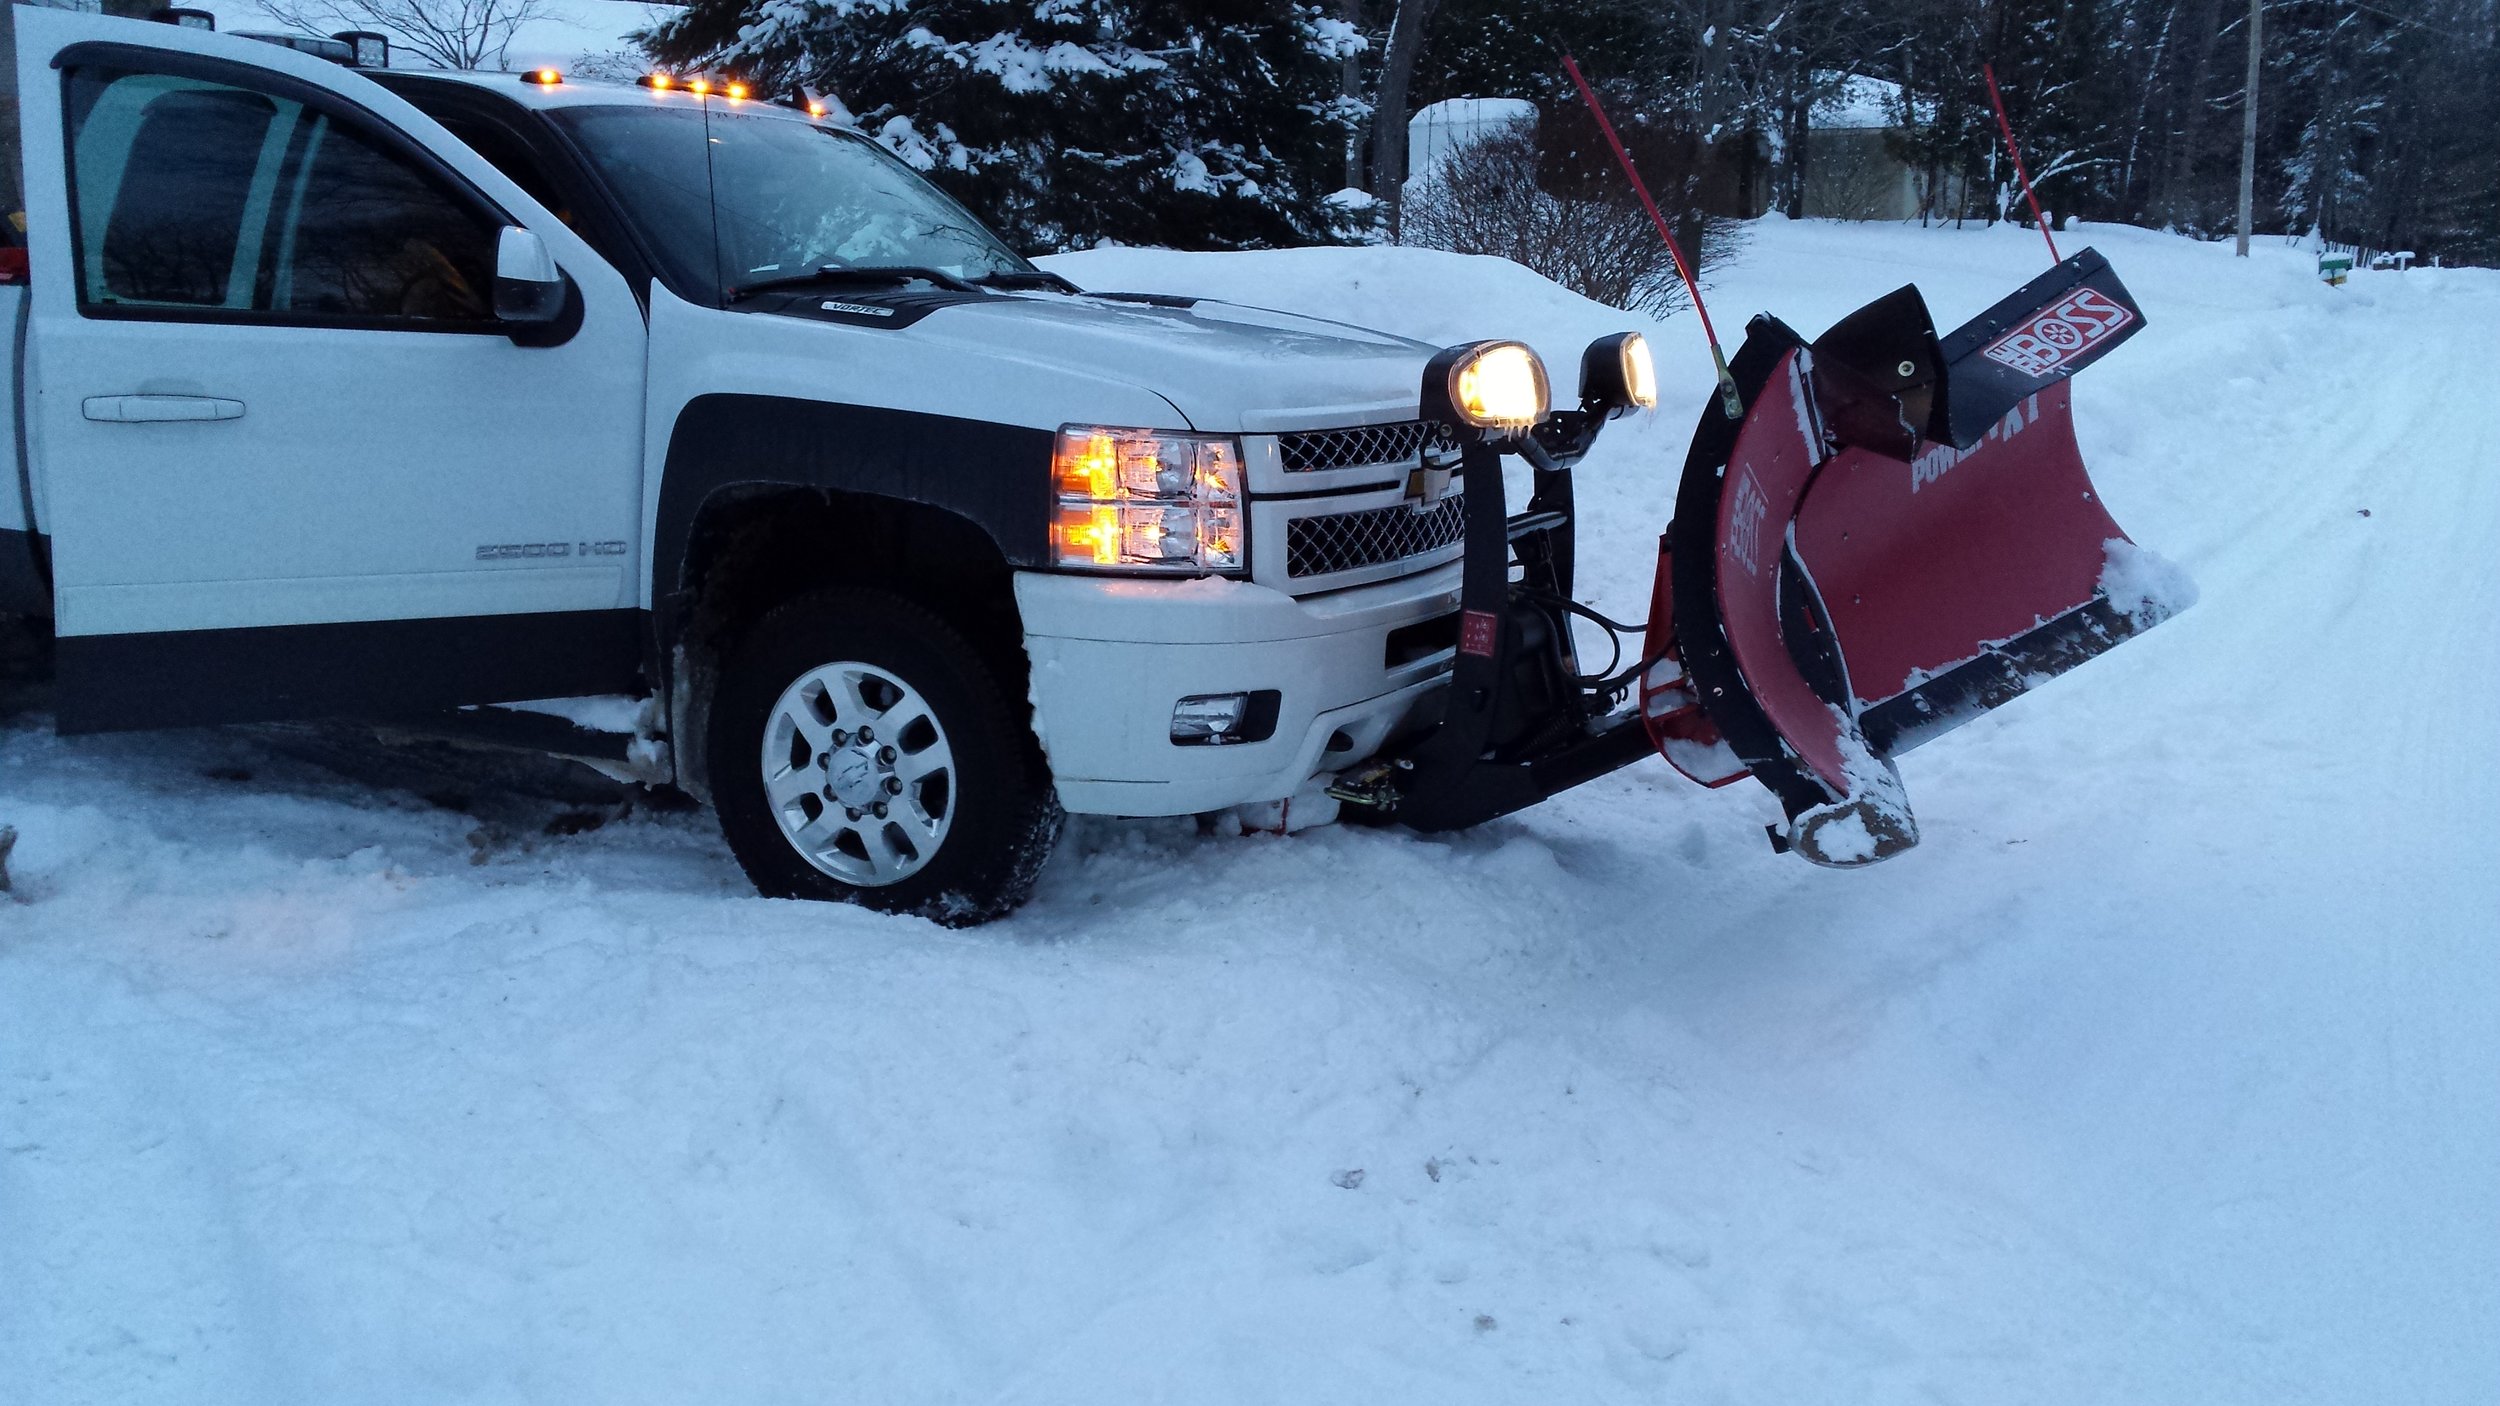   Snow Removal Services   